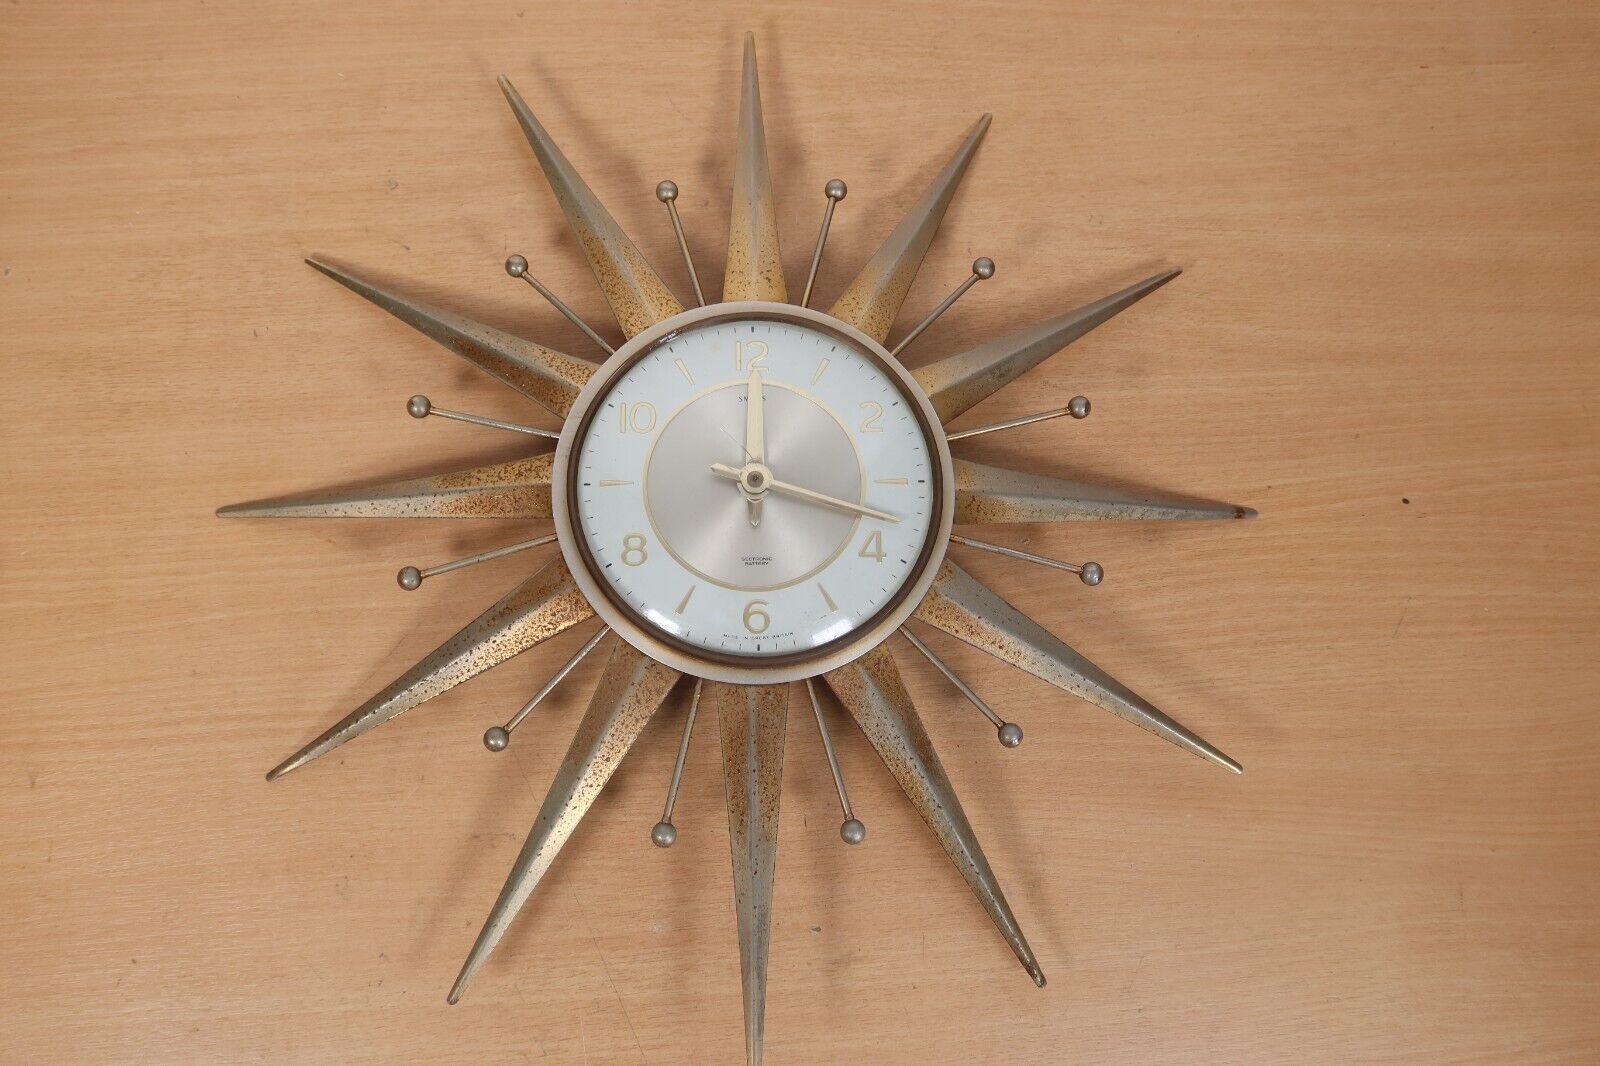 Vintage Smiths 1960s Sunburst Wall Clock Morning Sun Sectronic FAULTY PROJECT